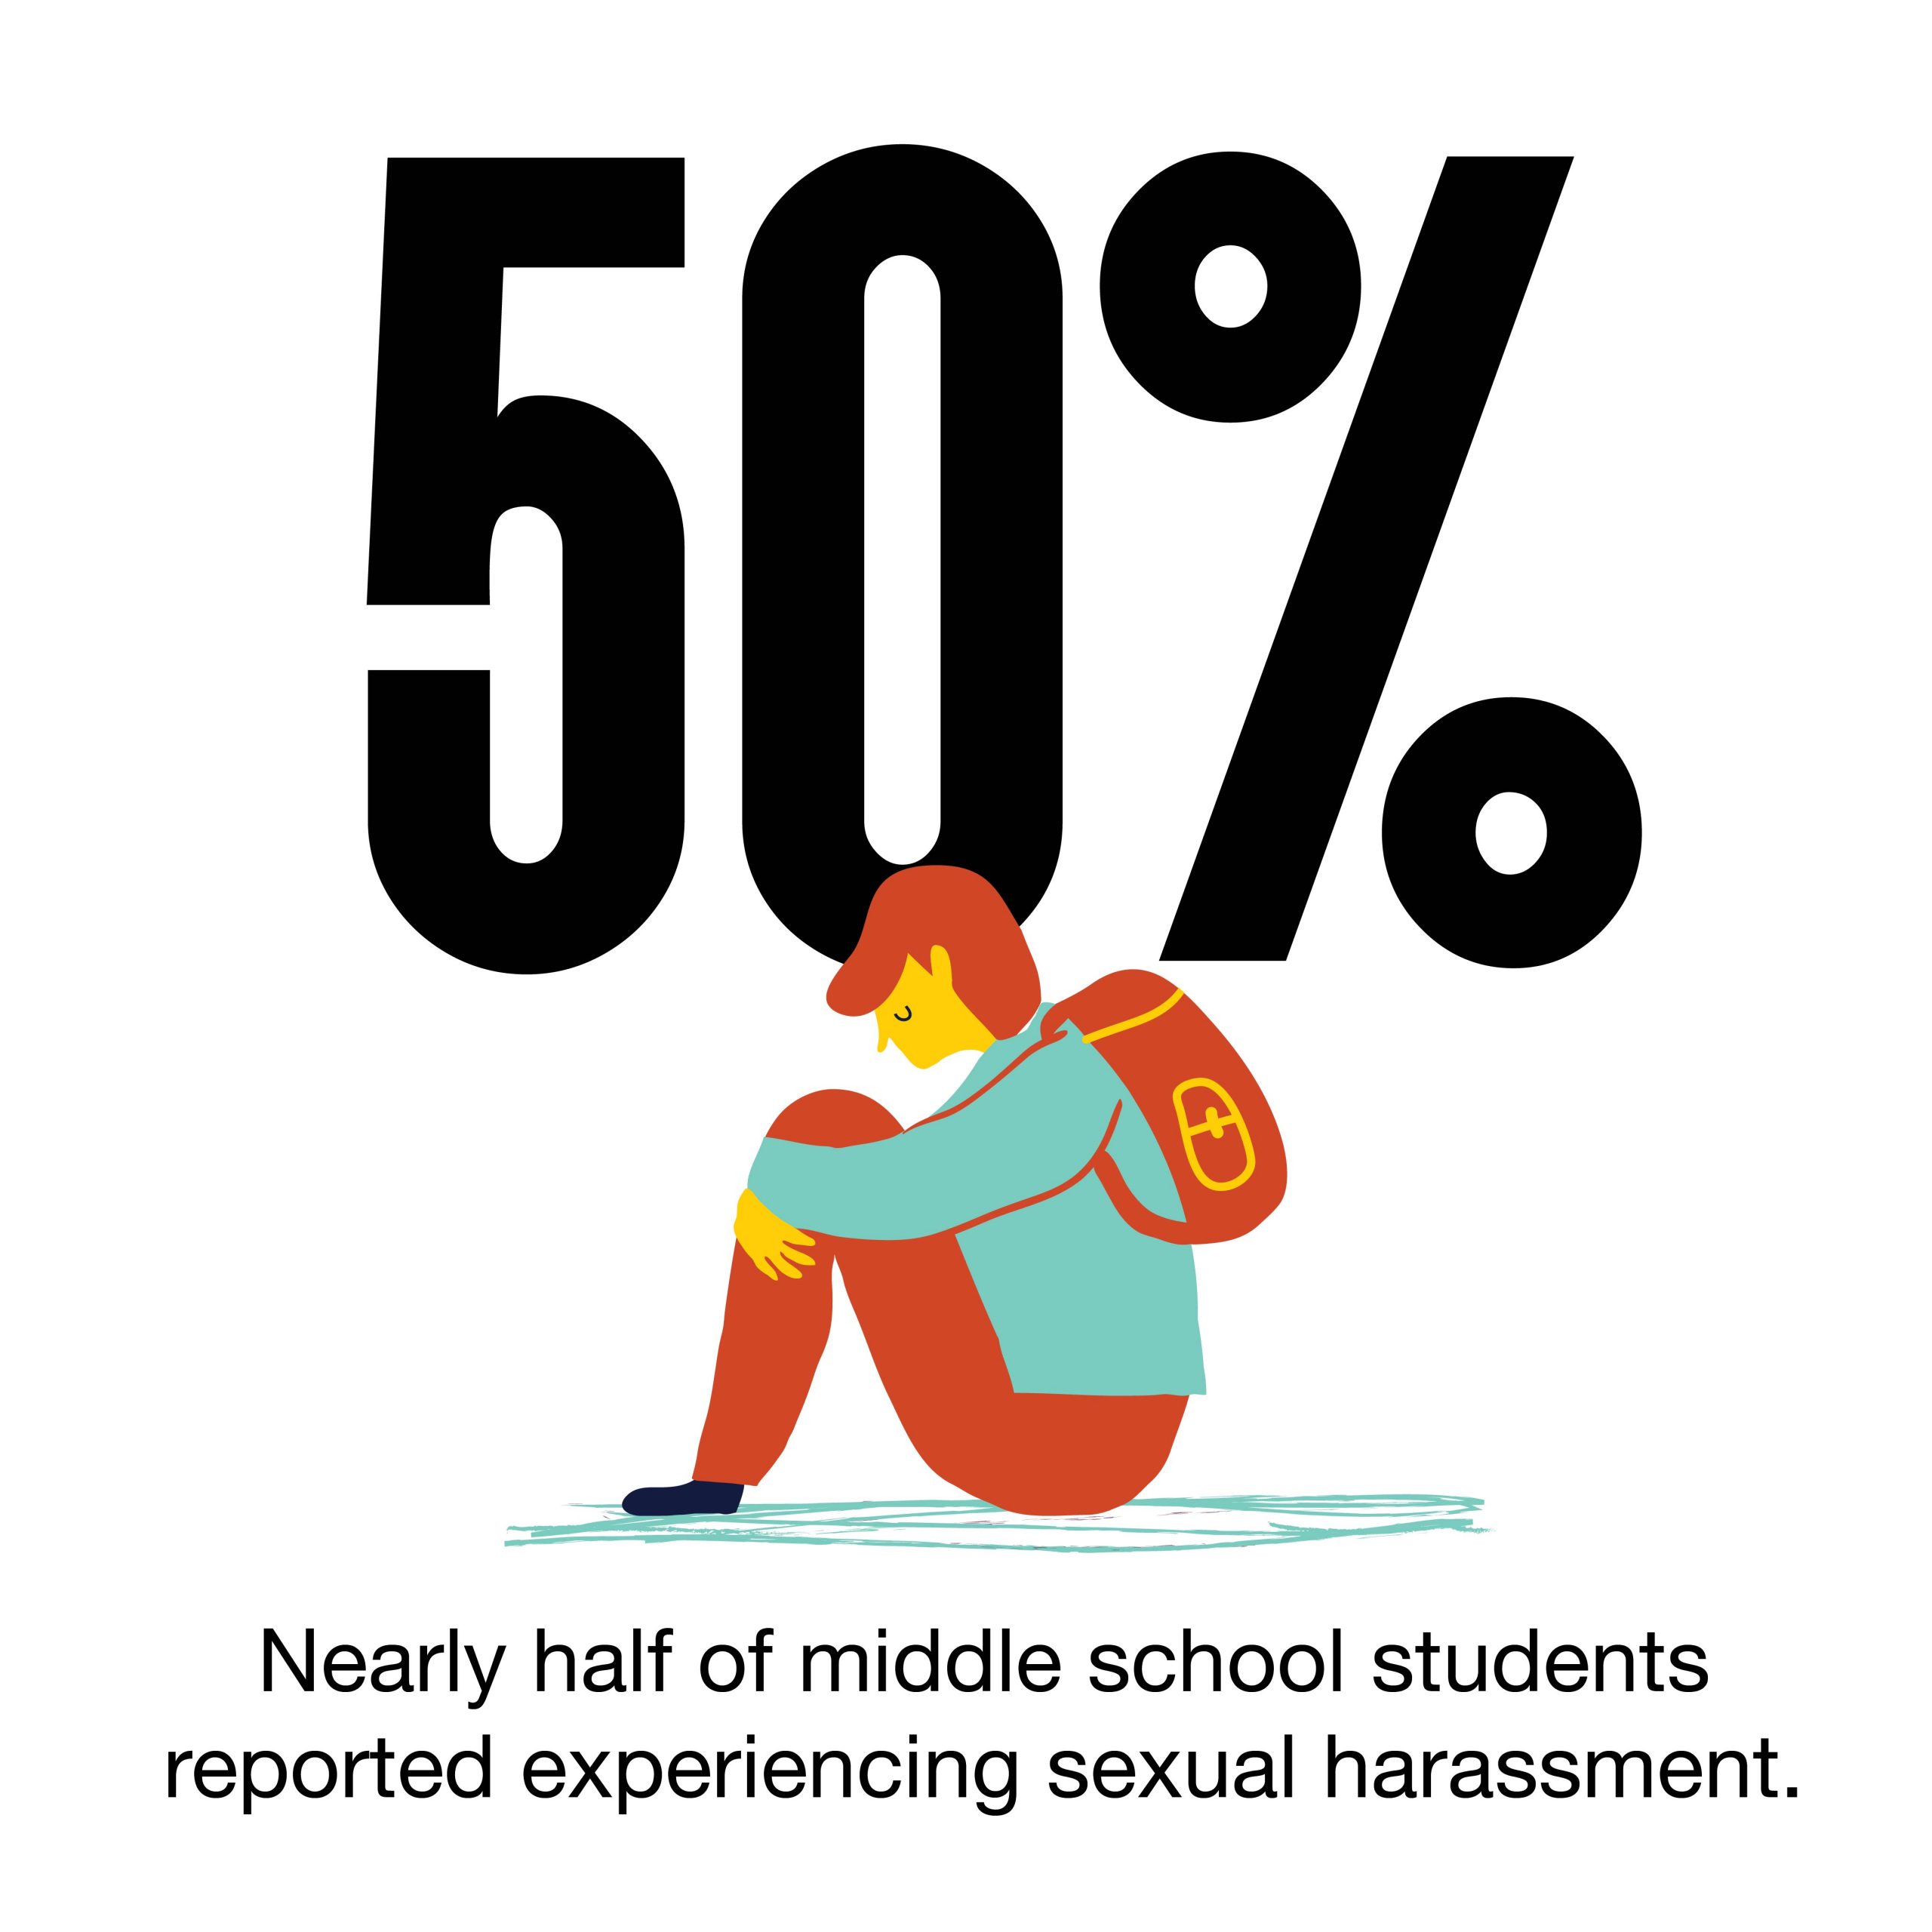 50% of middle school students reported experiencing sexual harassment